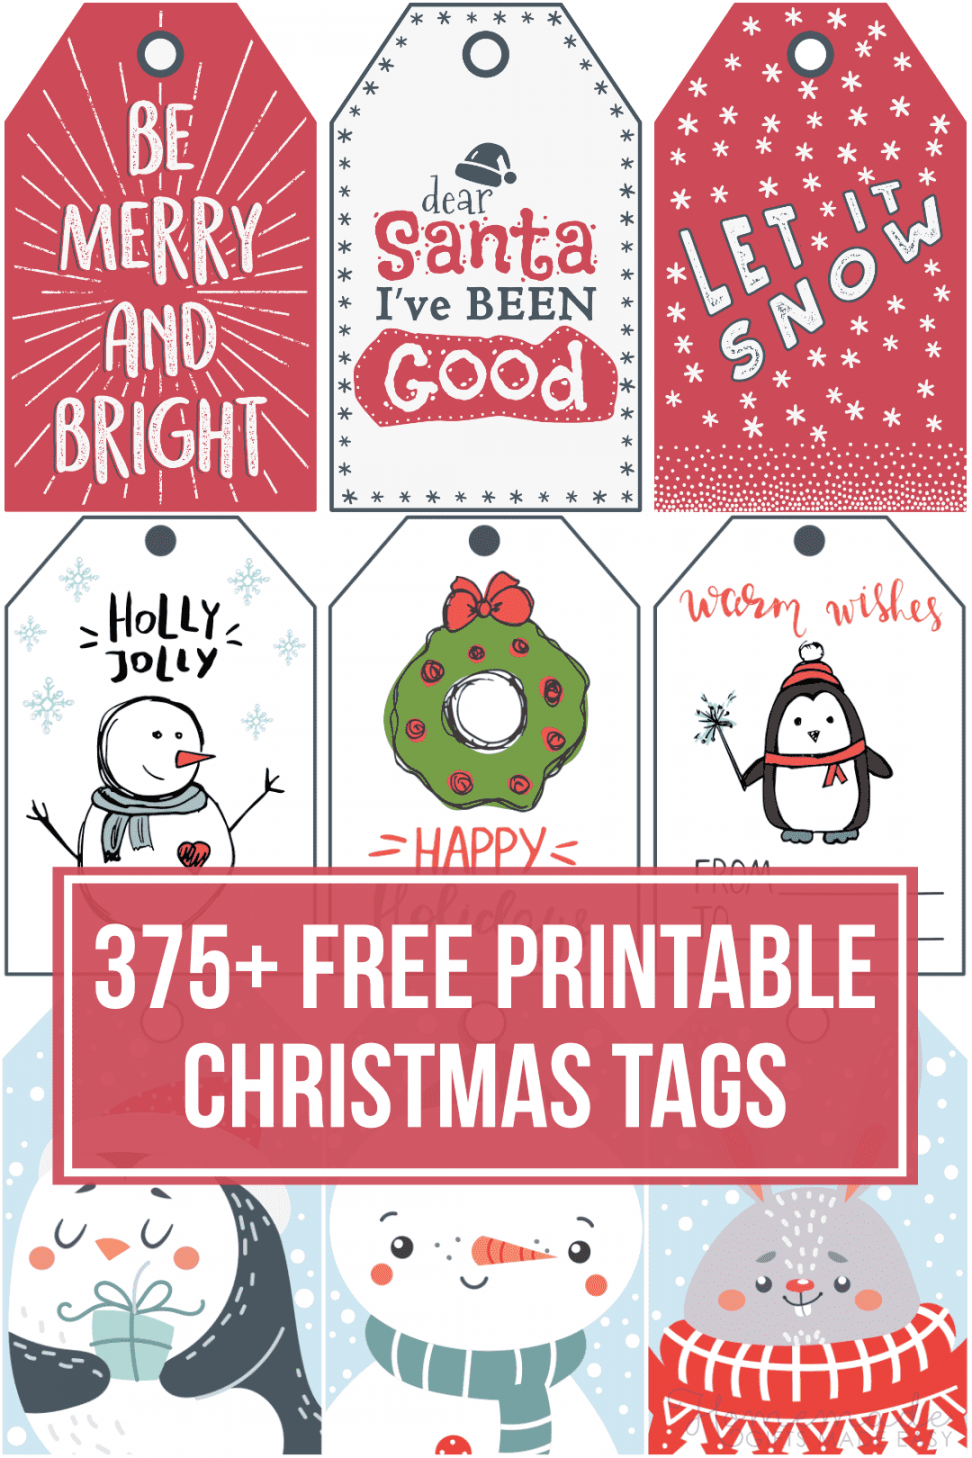 Free Printable Gift Tag - Printable - + Free Printable Christmas Tags for your Holiday Gifts